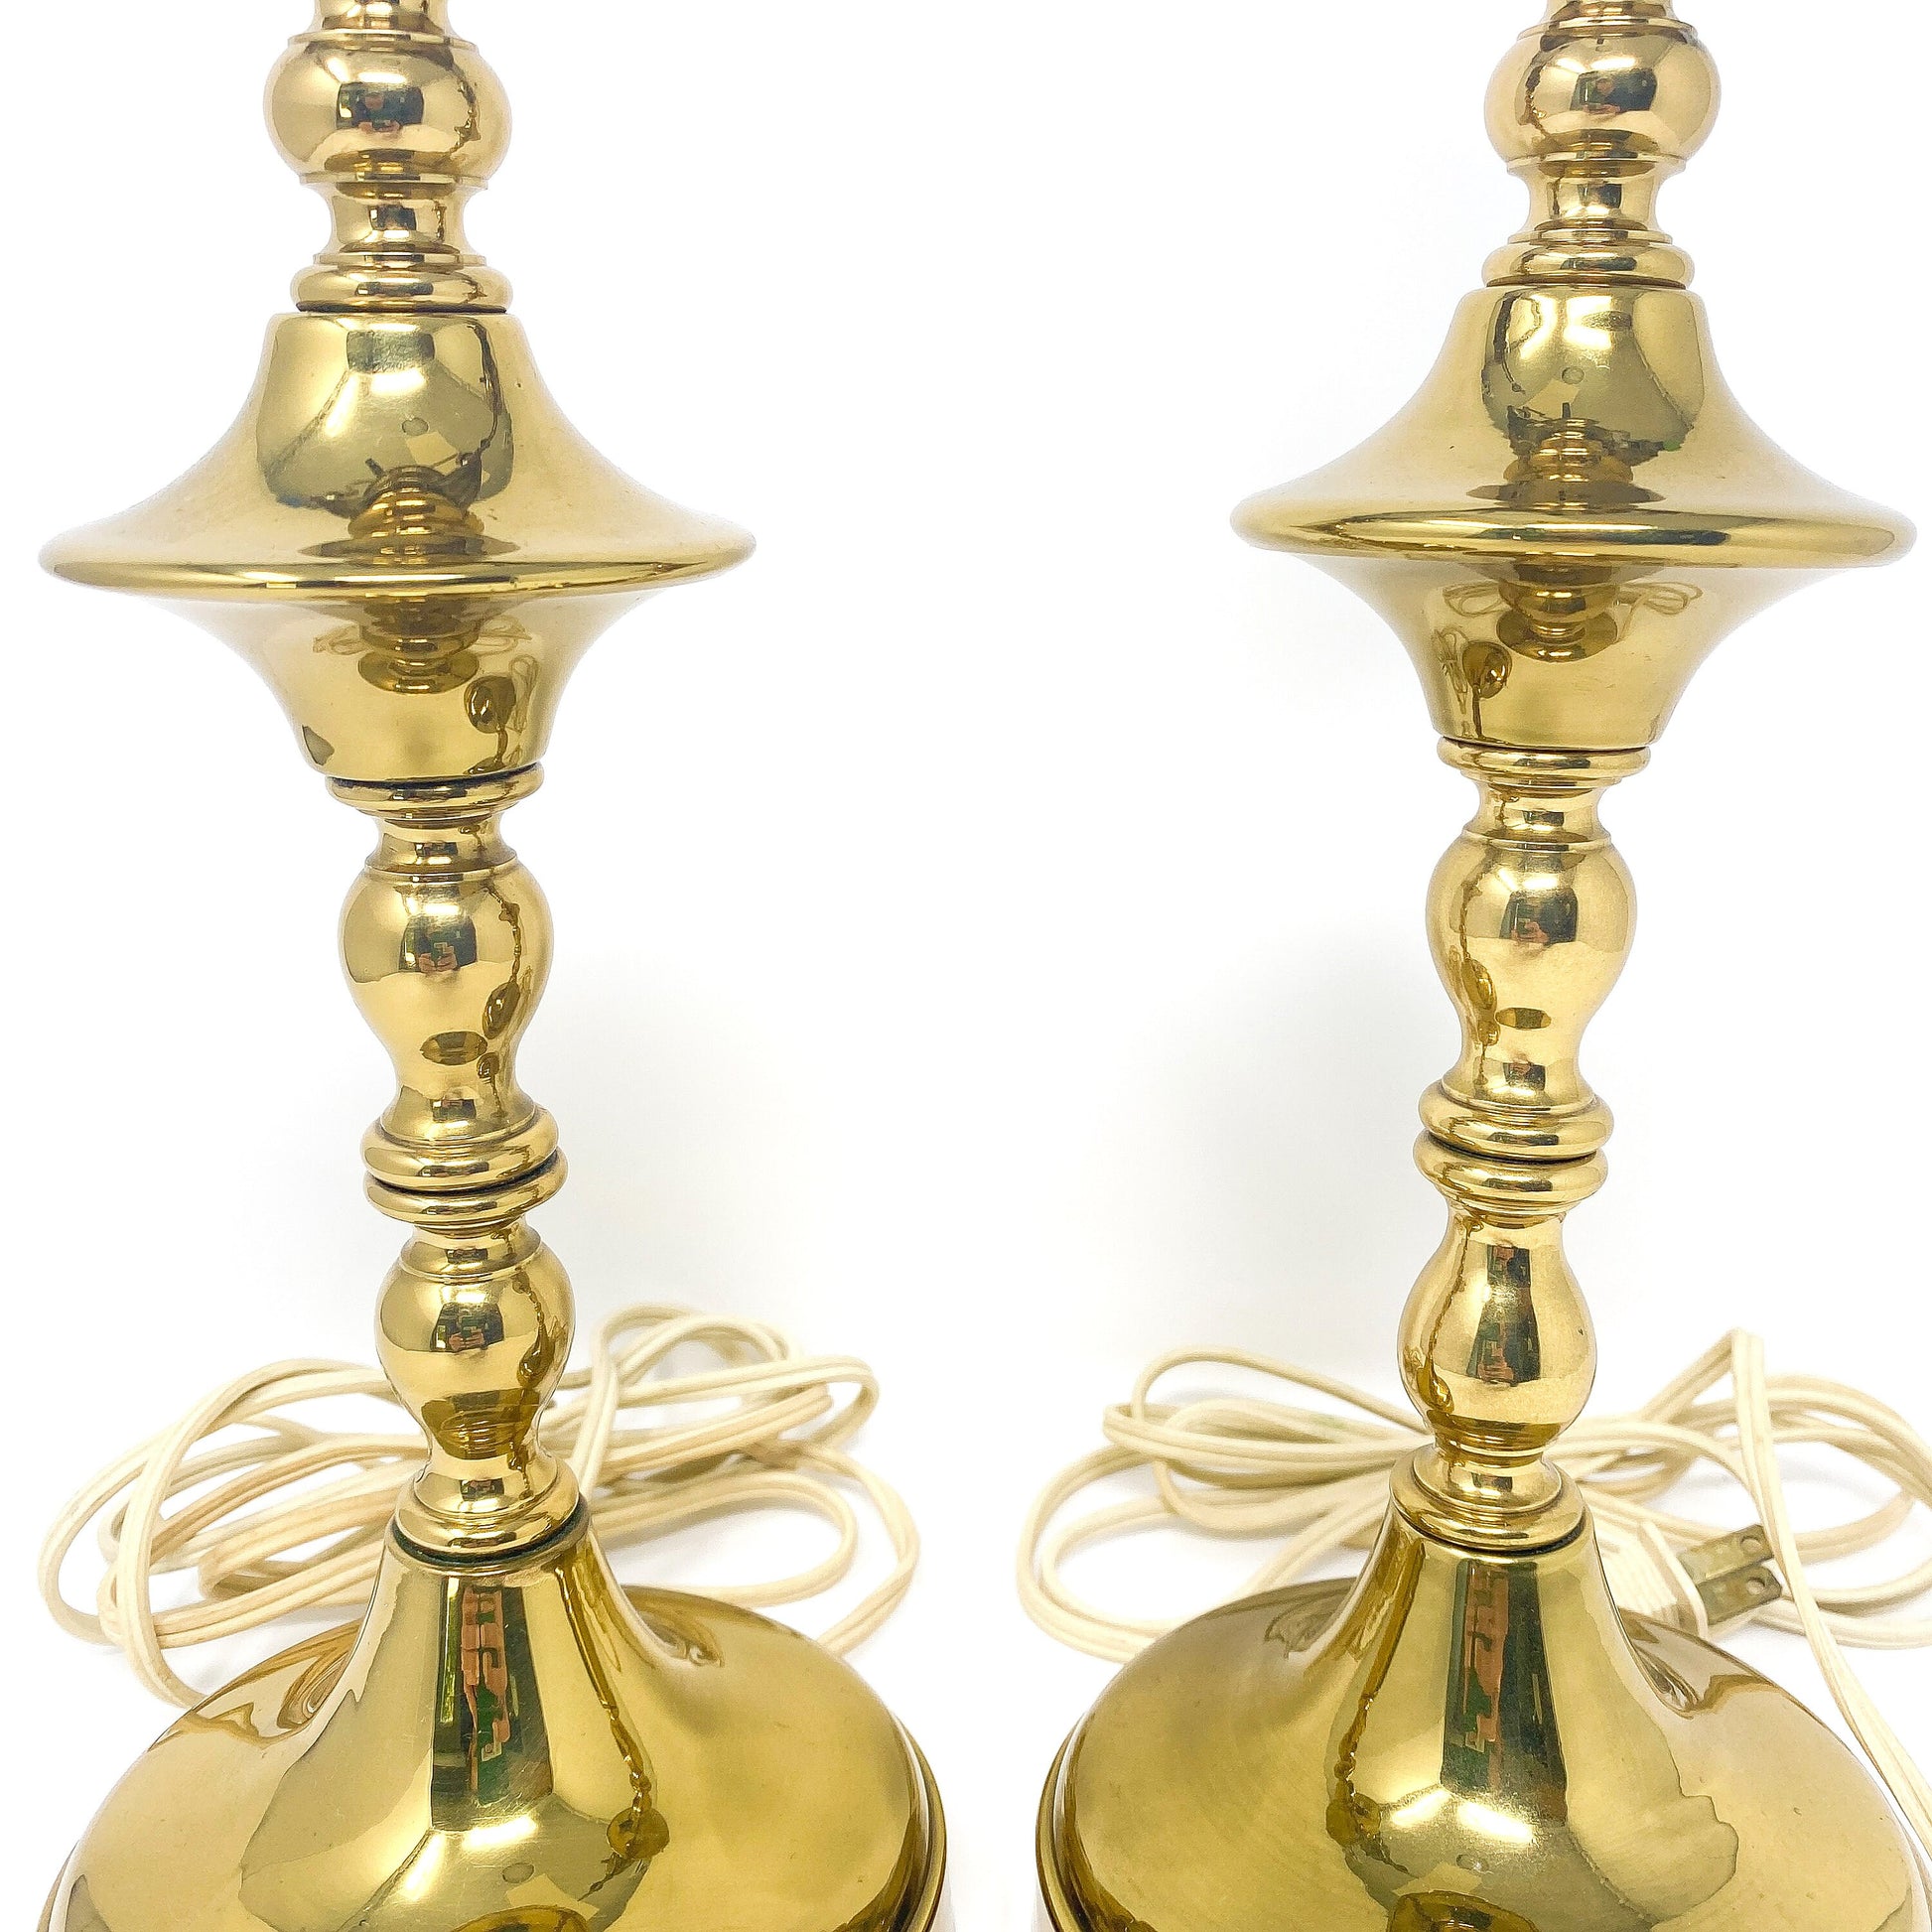 Pair of Vintage Brass Candlestick Table Lamps